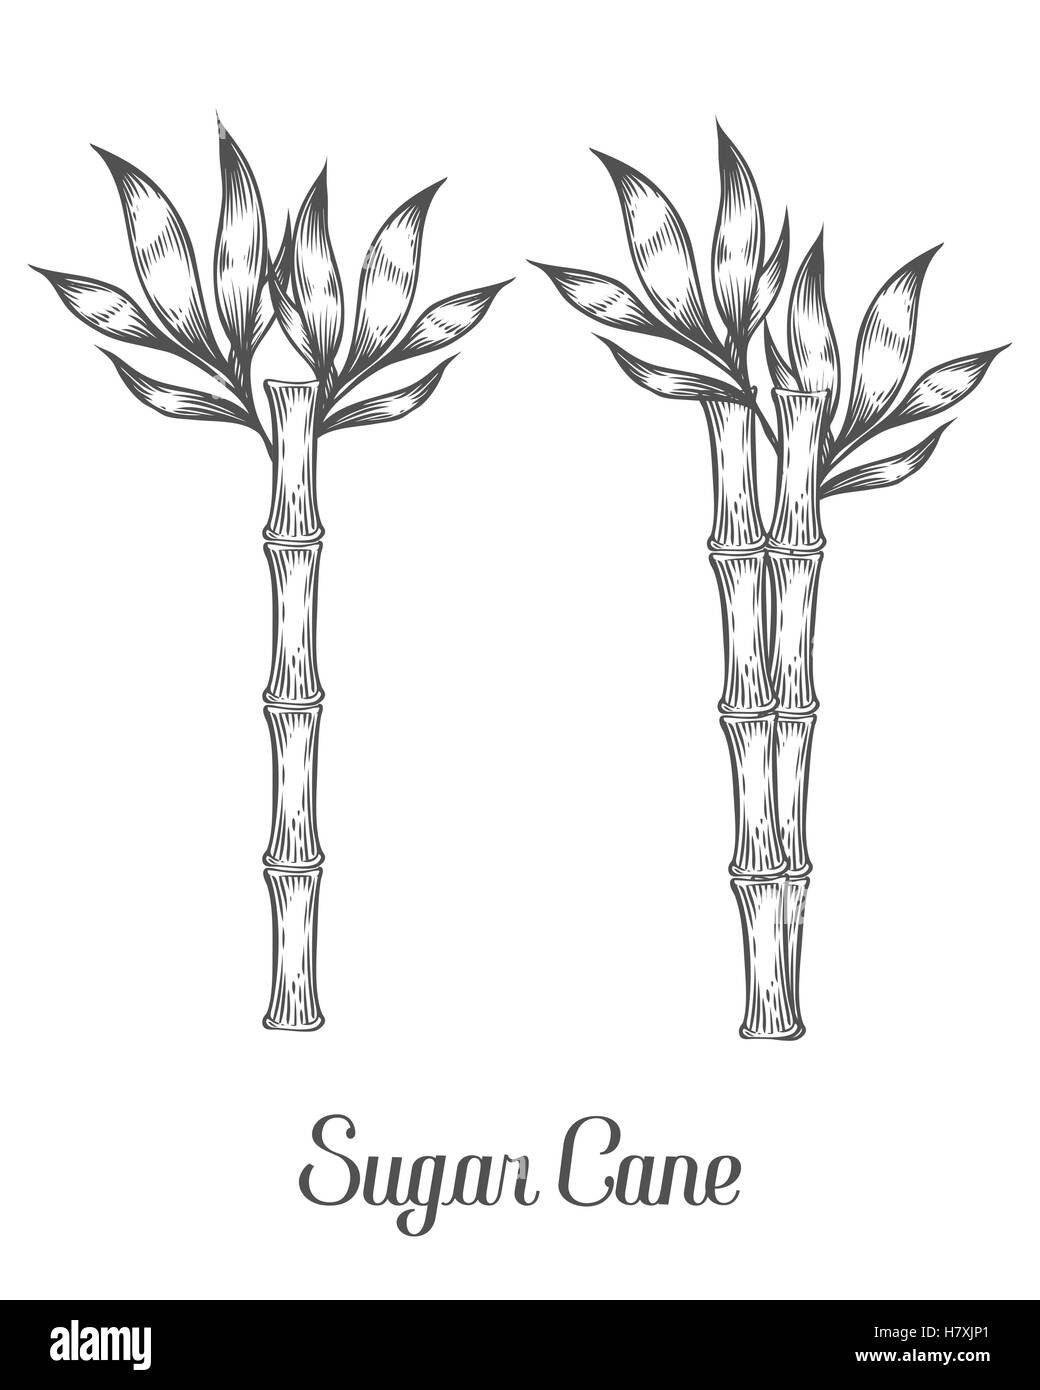 Sugar cane stem branch and leaf vector hand drawn illustration. Sugarcane Black on white background. Engraving style. Stock Vector